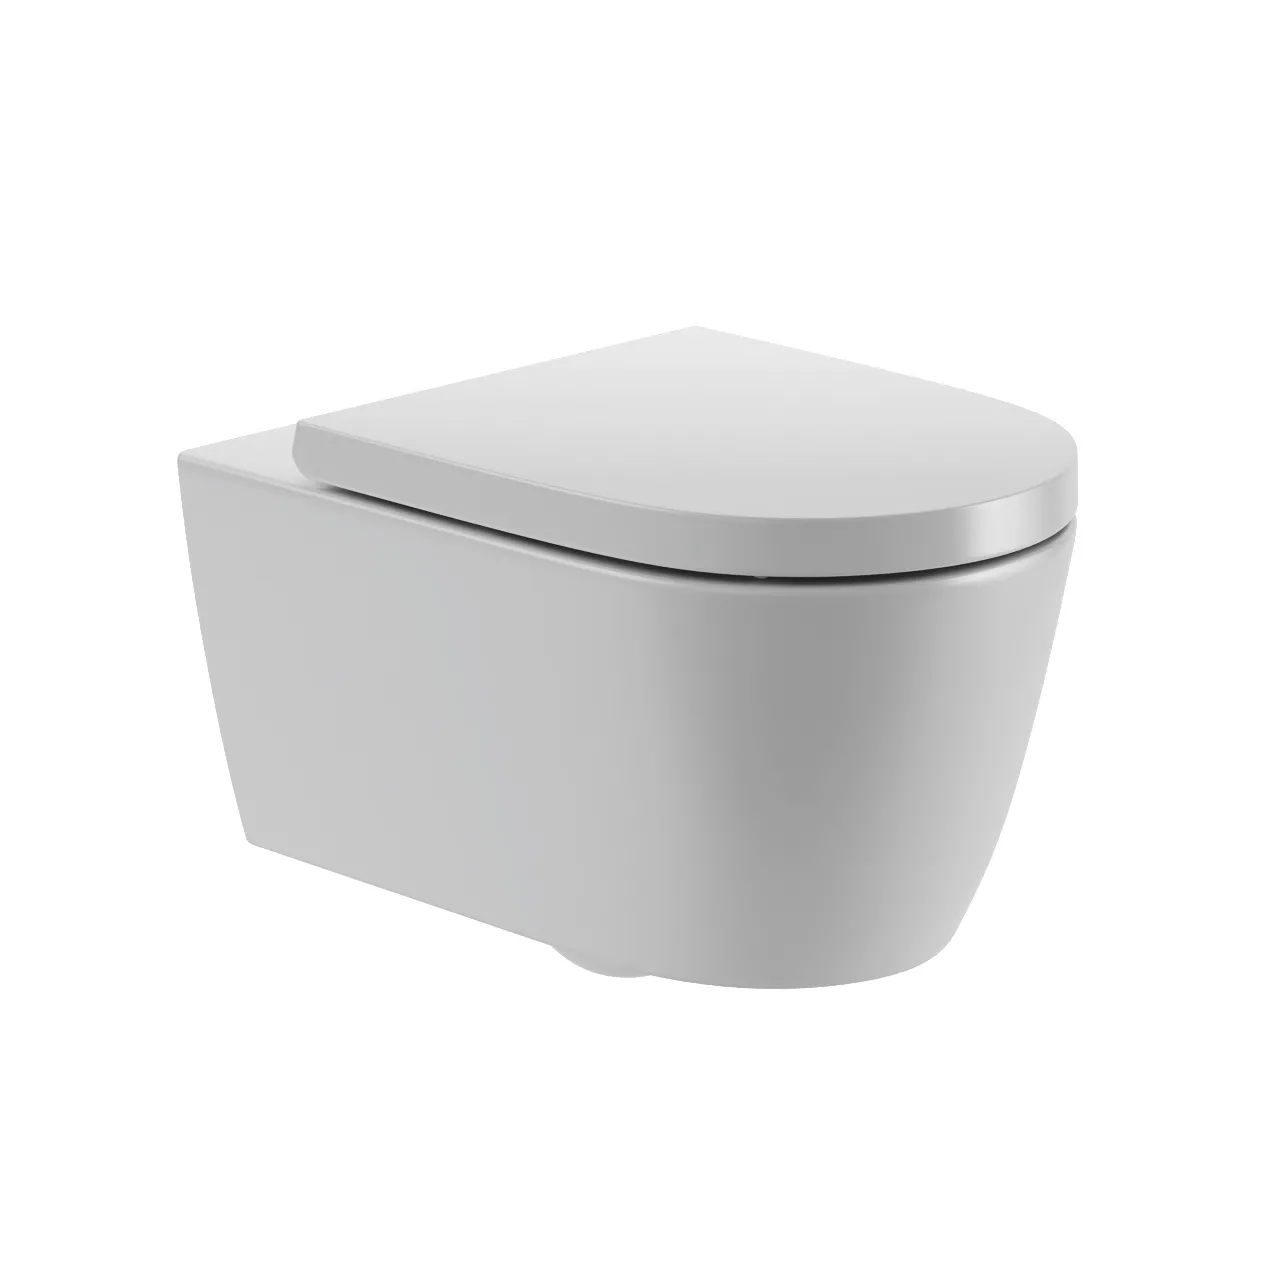 Bathroom – me-toilet-wall-mounted-by-duravit